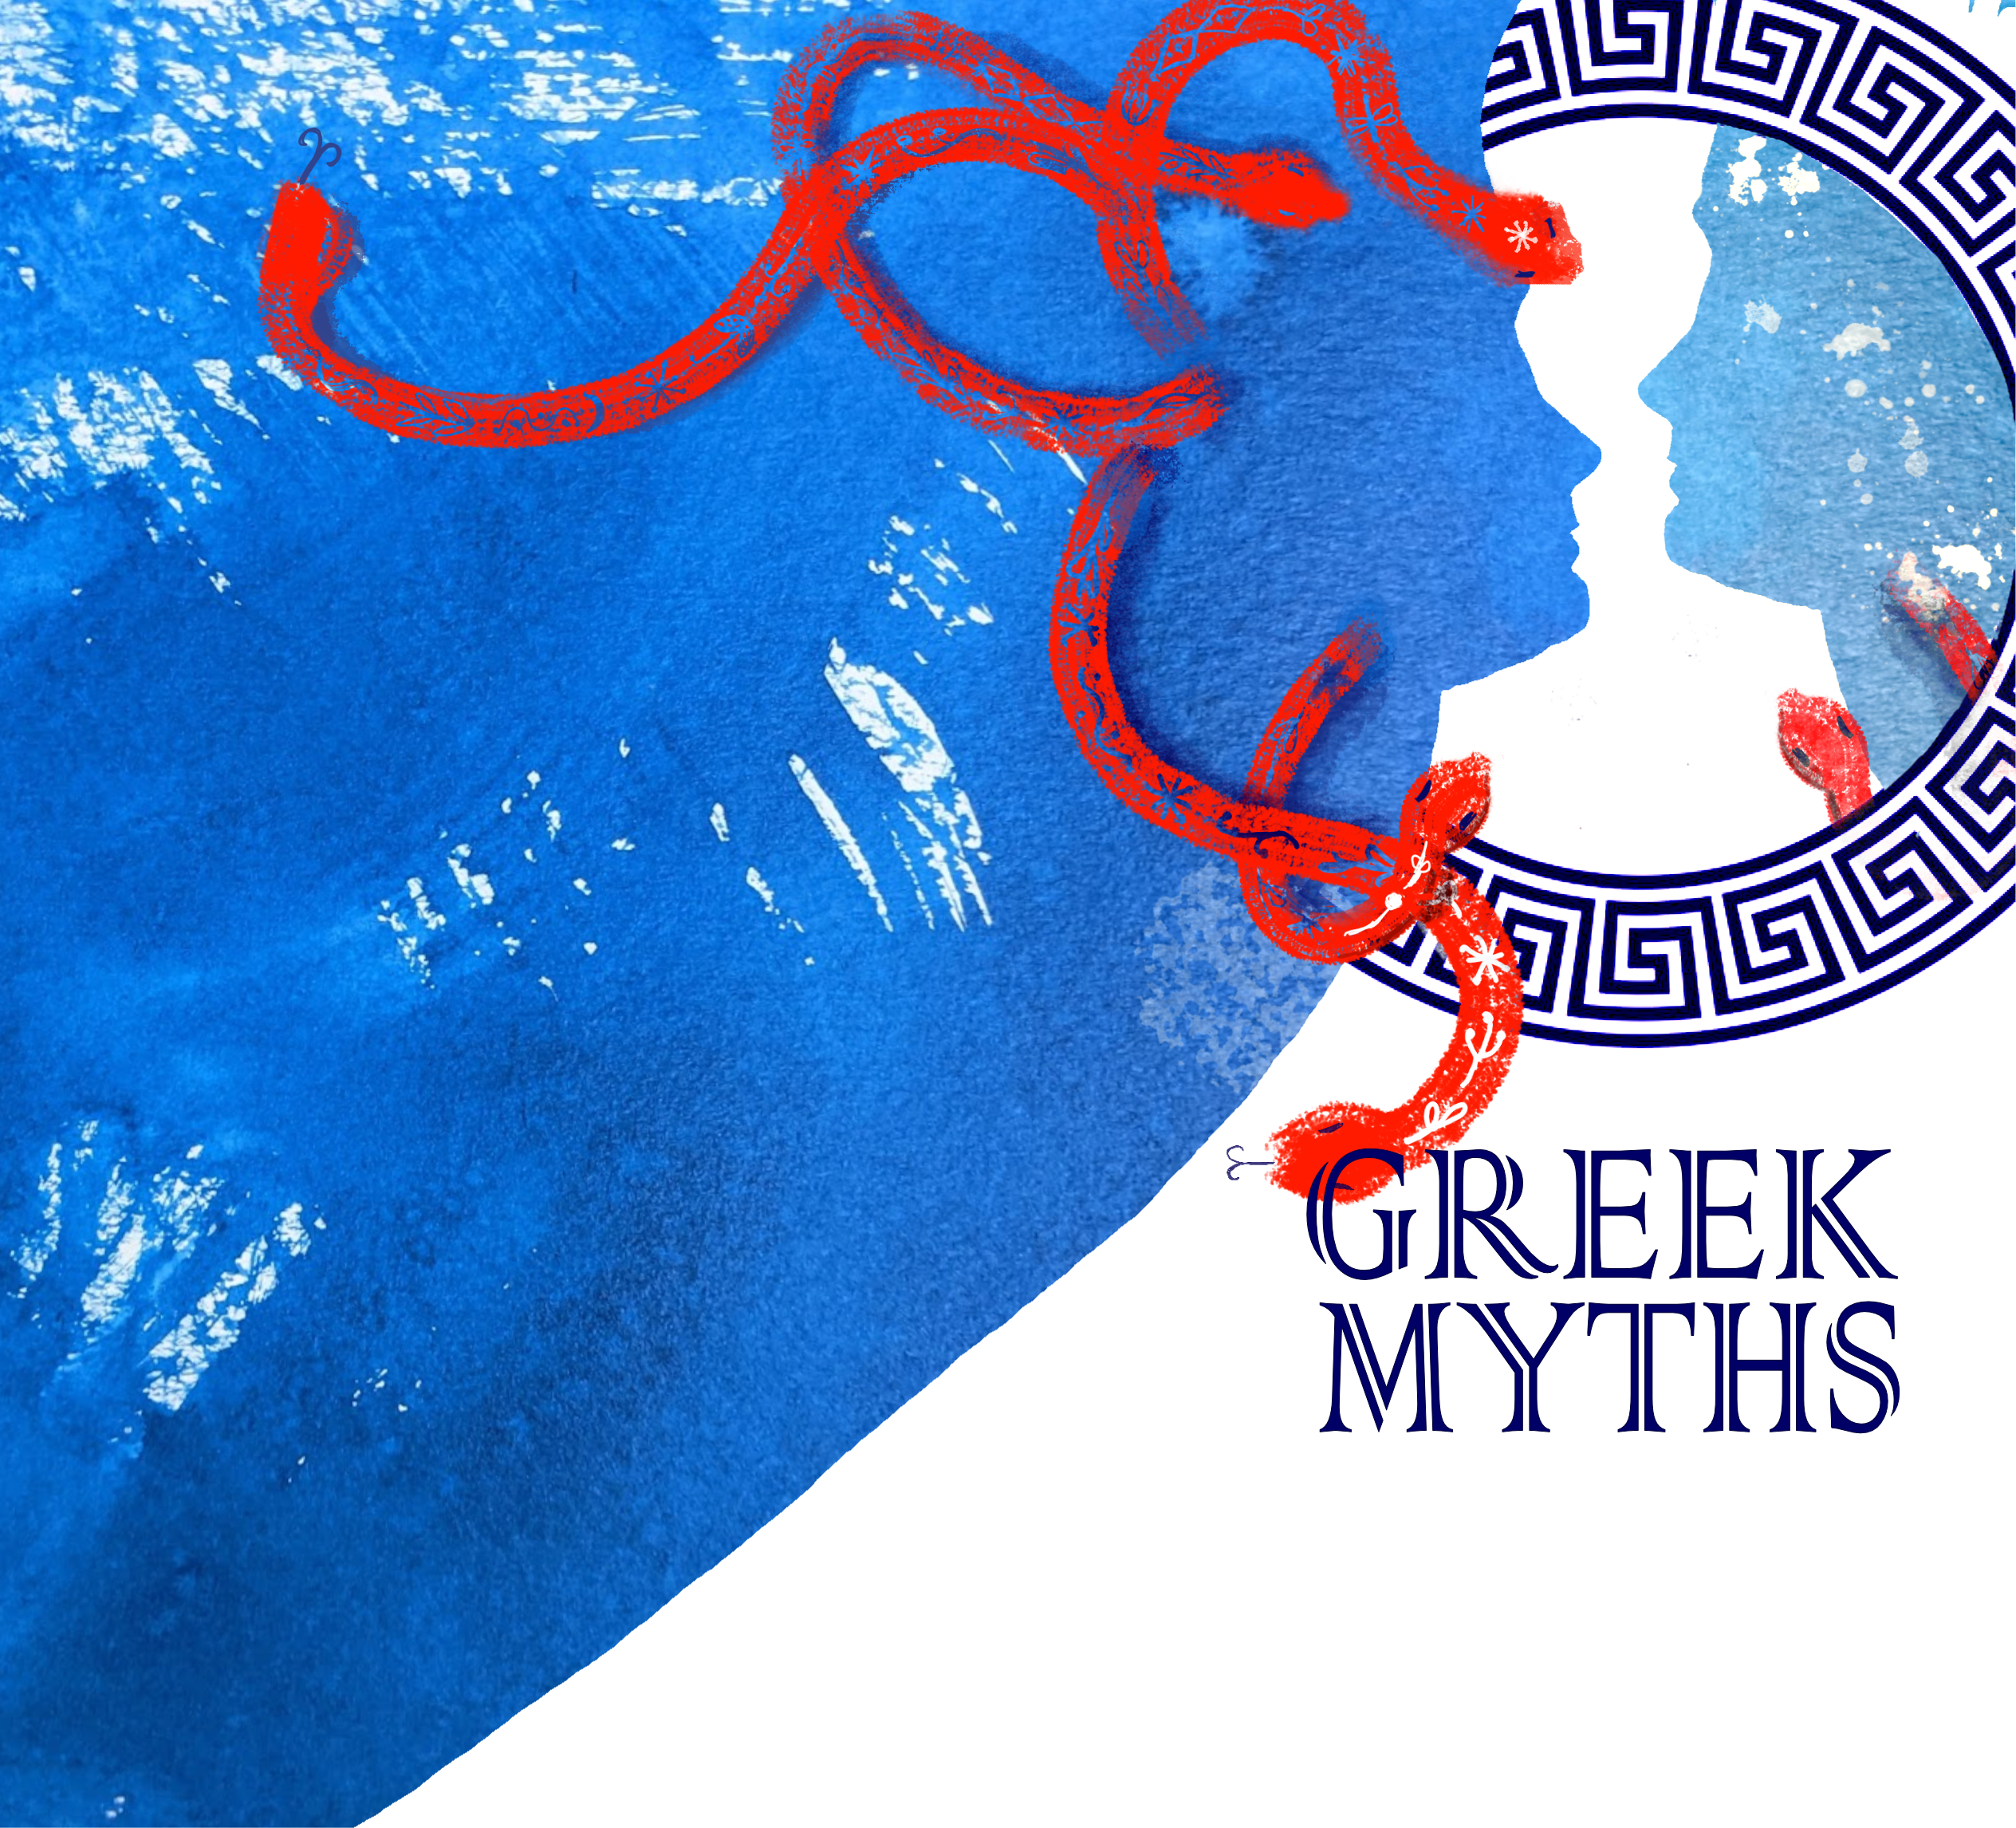 The profile of a blue face looks into a mirror and sees a reflection. There are red snakes around the face. The titke reads Greek Myths